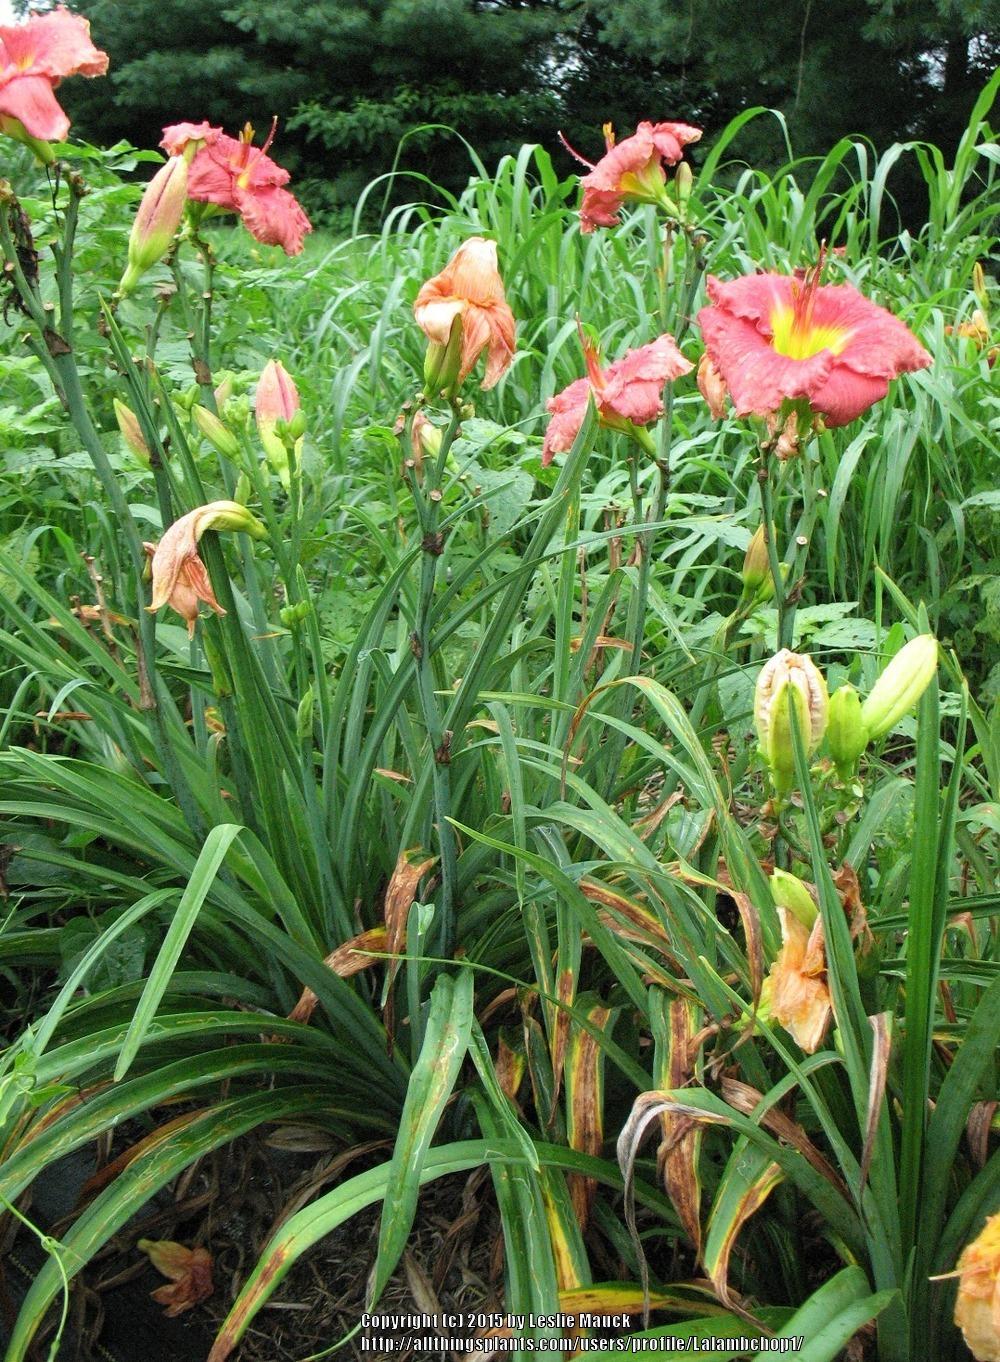 Photo of Daylily (Hemerocallis 'In the Heart of It All') uploaded by Lalambchop1